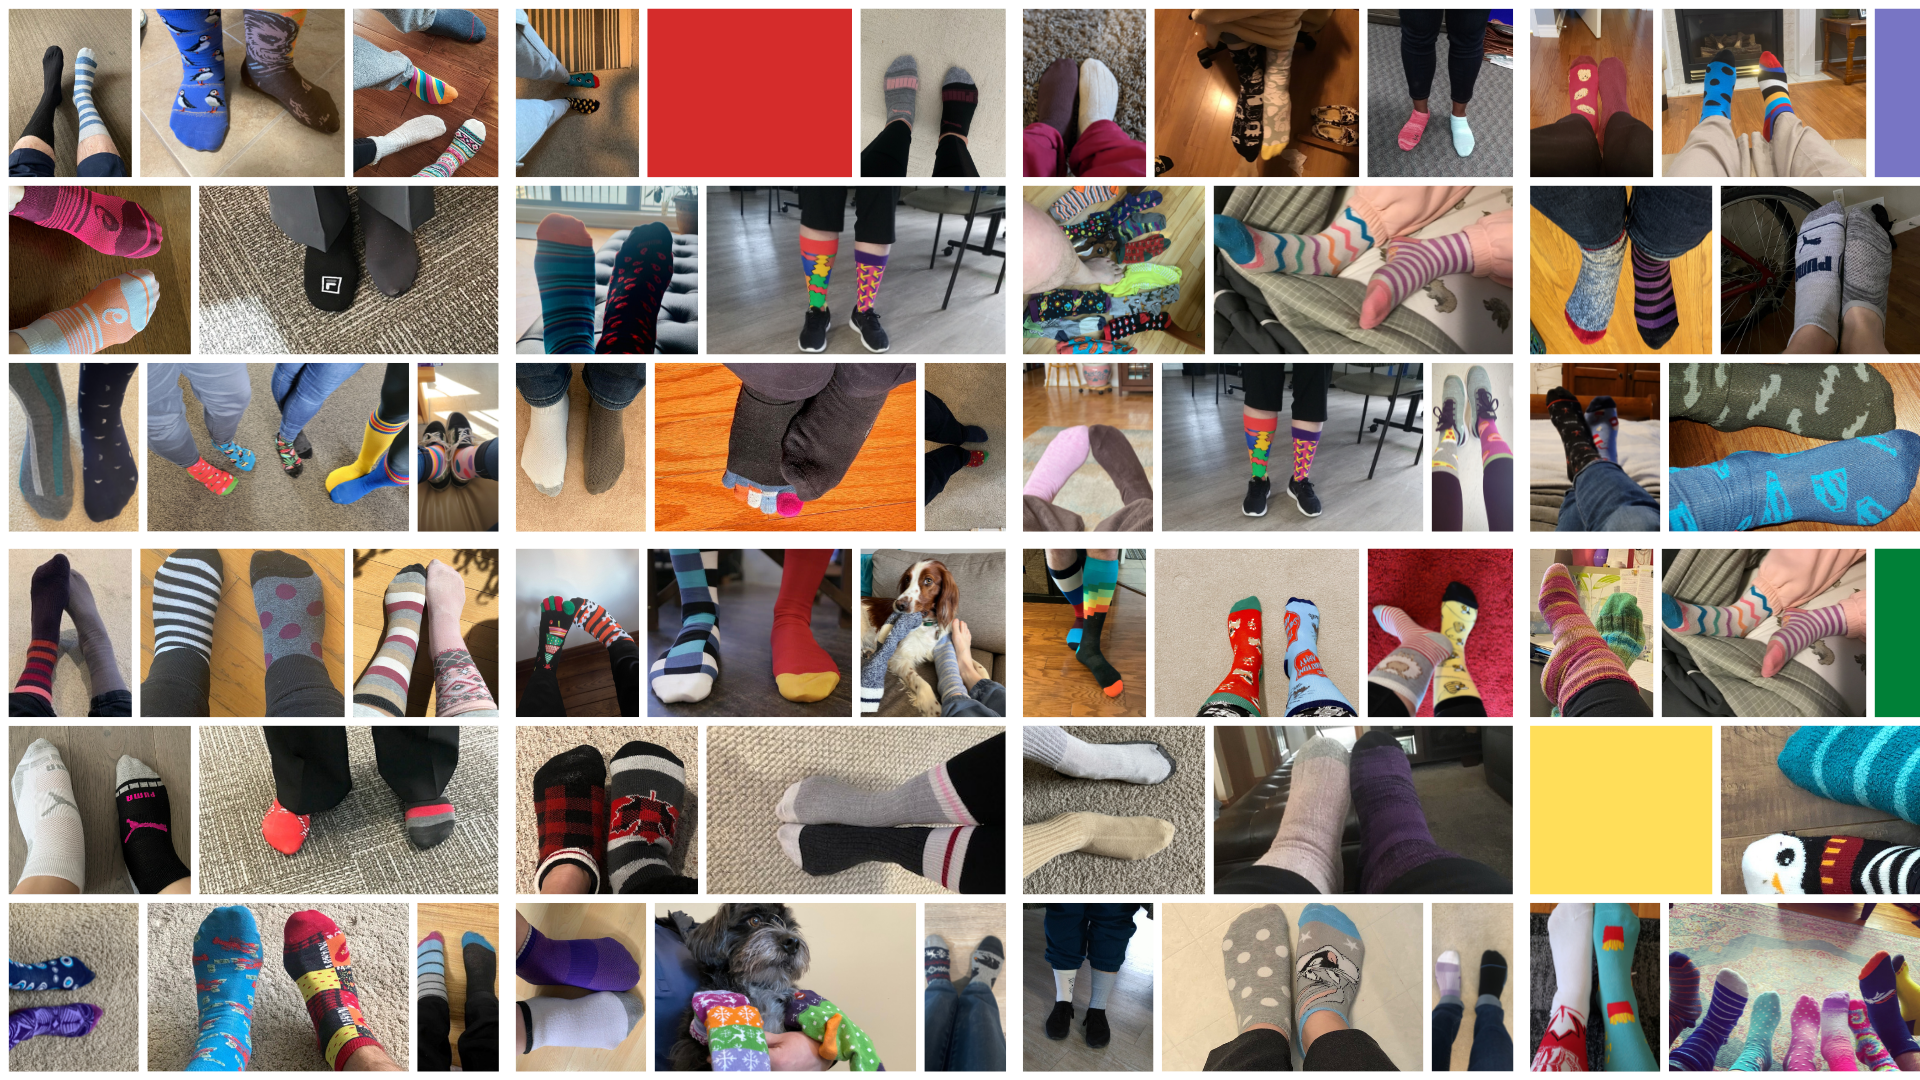 Lots and lots of colourful mismatched socks